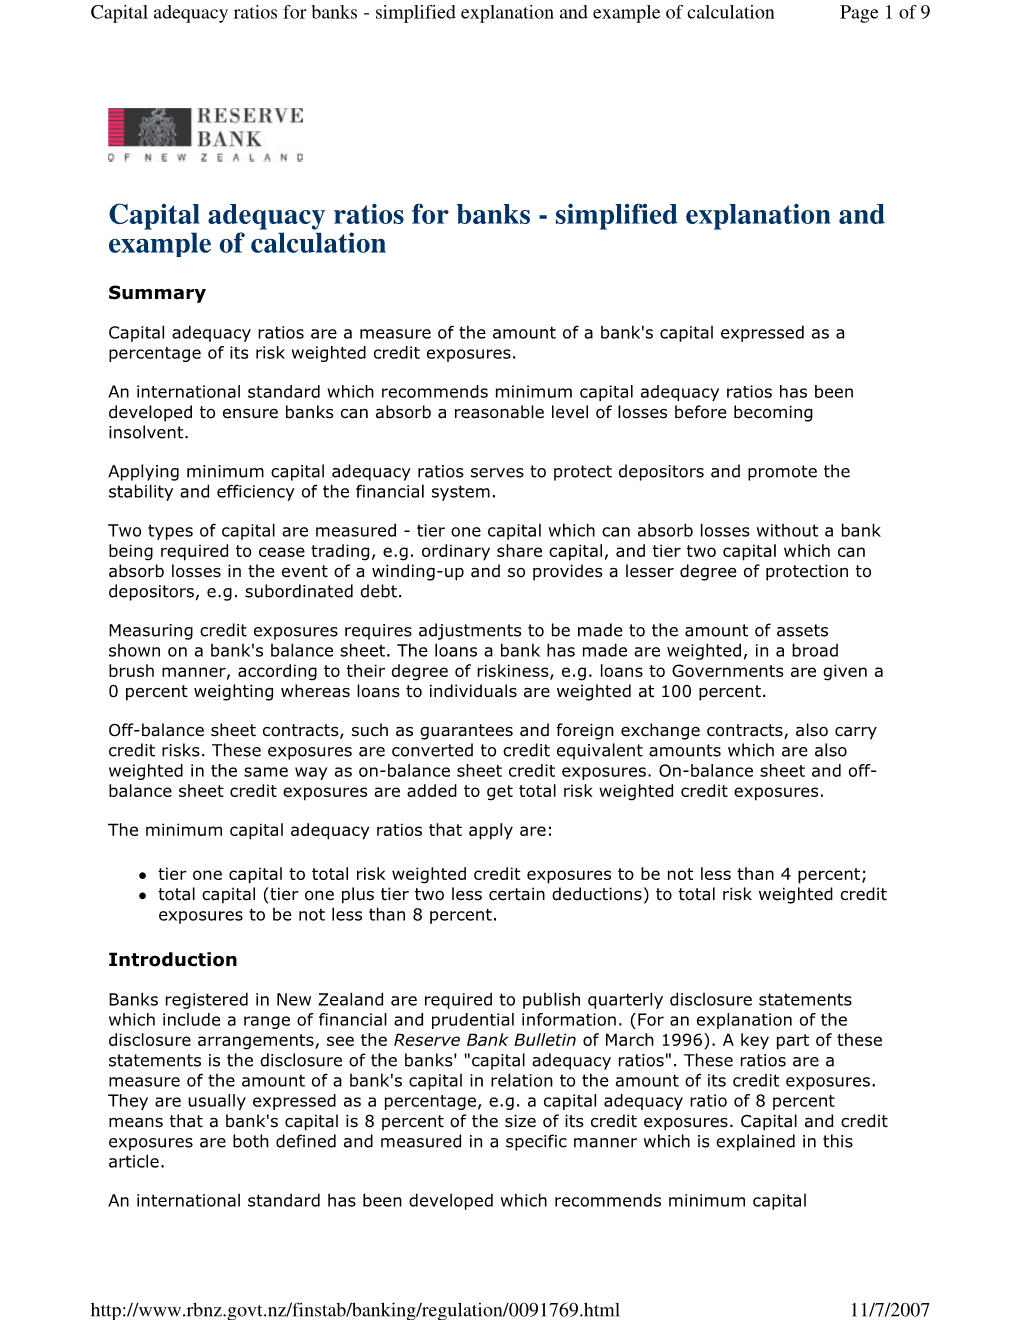 Capital Adequacy Ratios for Banks - Simplified Explanation and Example of Calculation Page 1 of 9